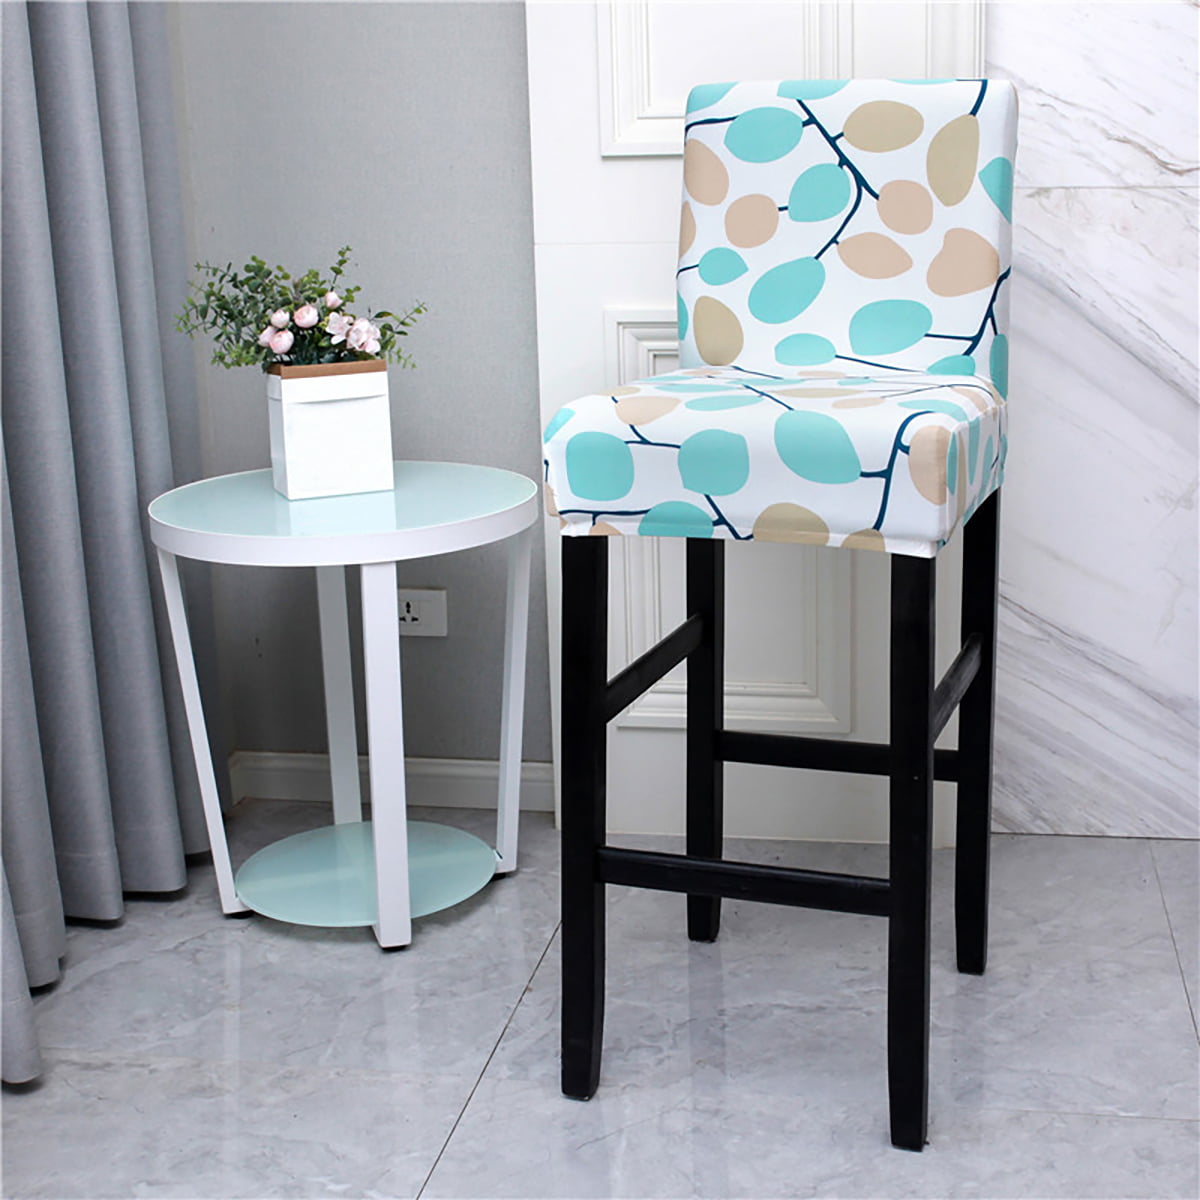 2pcs Bar Stool Cover 13.7" Round Rotate Chair Seat Slipcover Sponge Leaves 